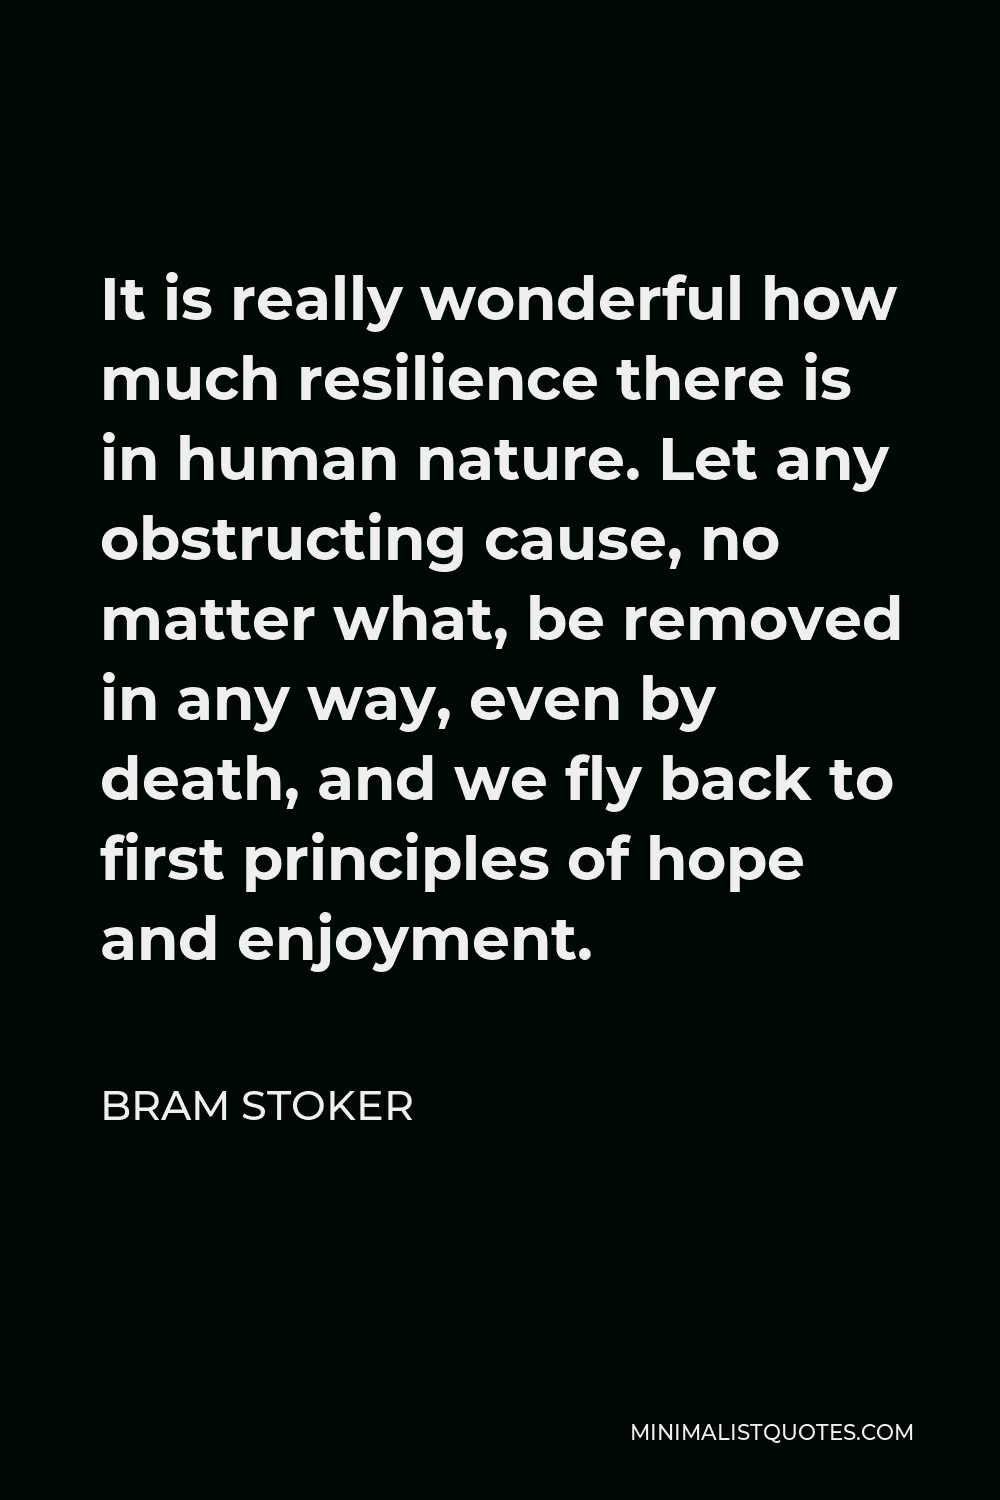 Bram Stoker Quote - It is really wonderful how much resilience there is in human nature. Let any obstructing cause, no matter what, be removed in any way, even by death, and we fly back to first principles of hope and enjoyment.